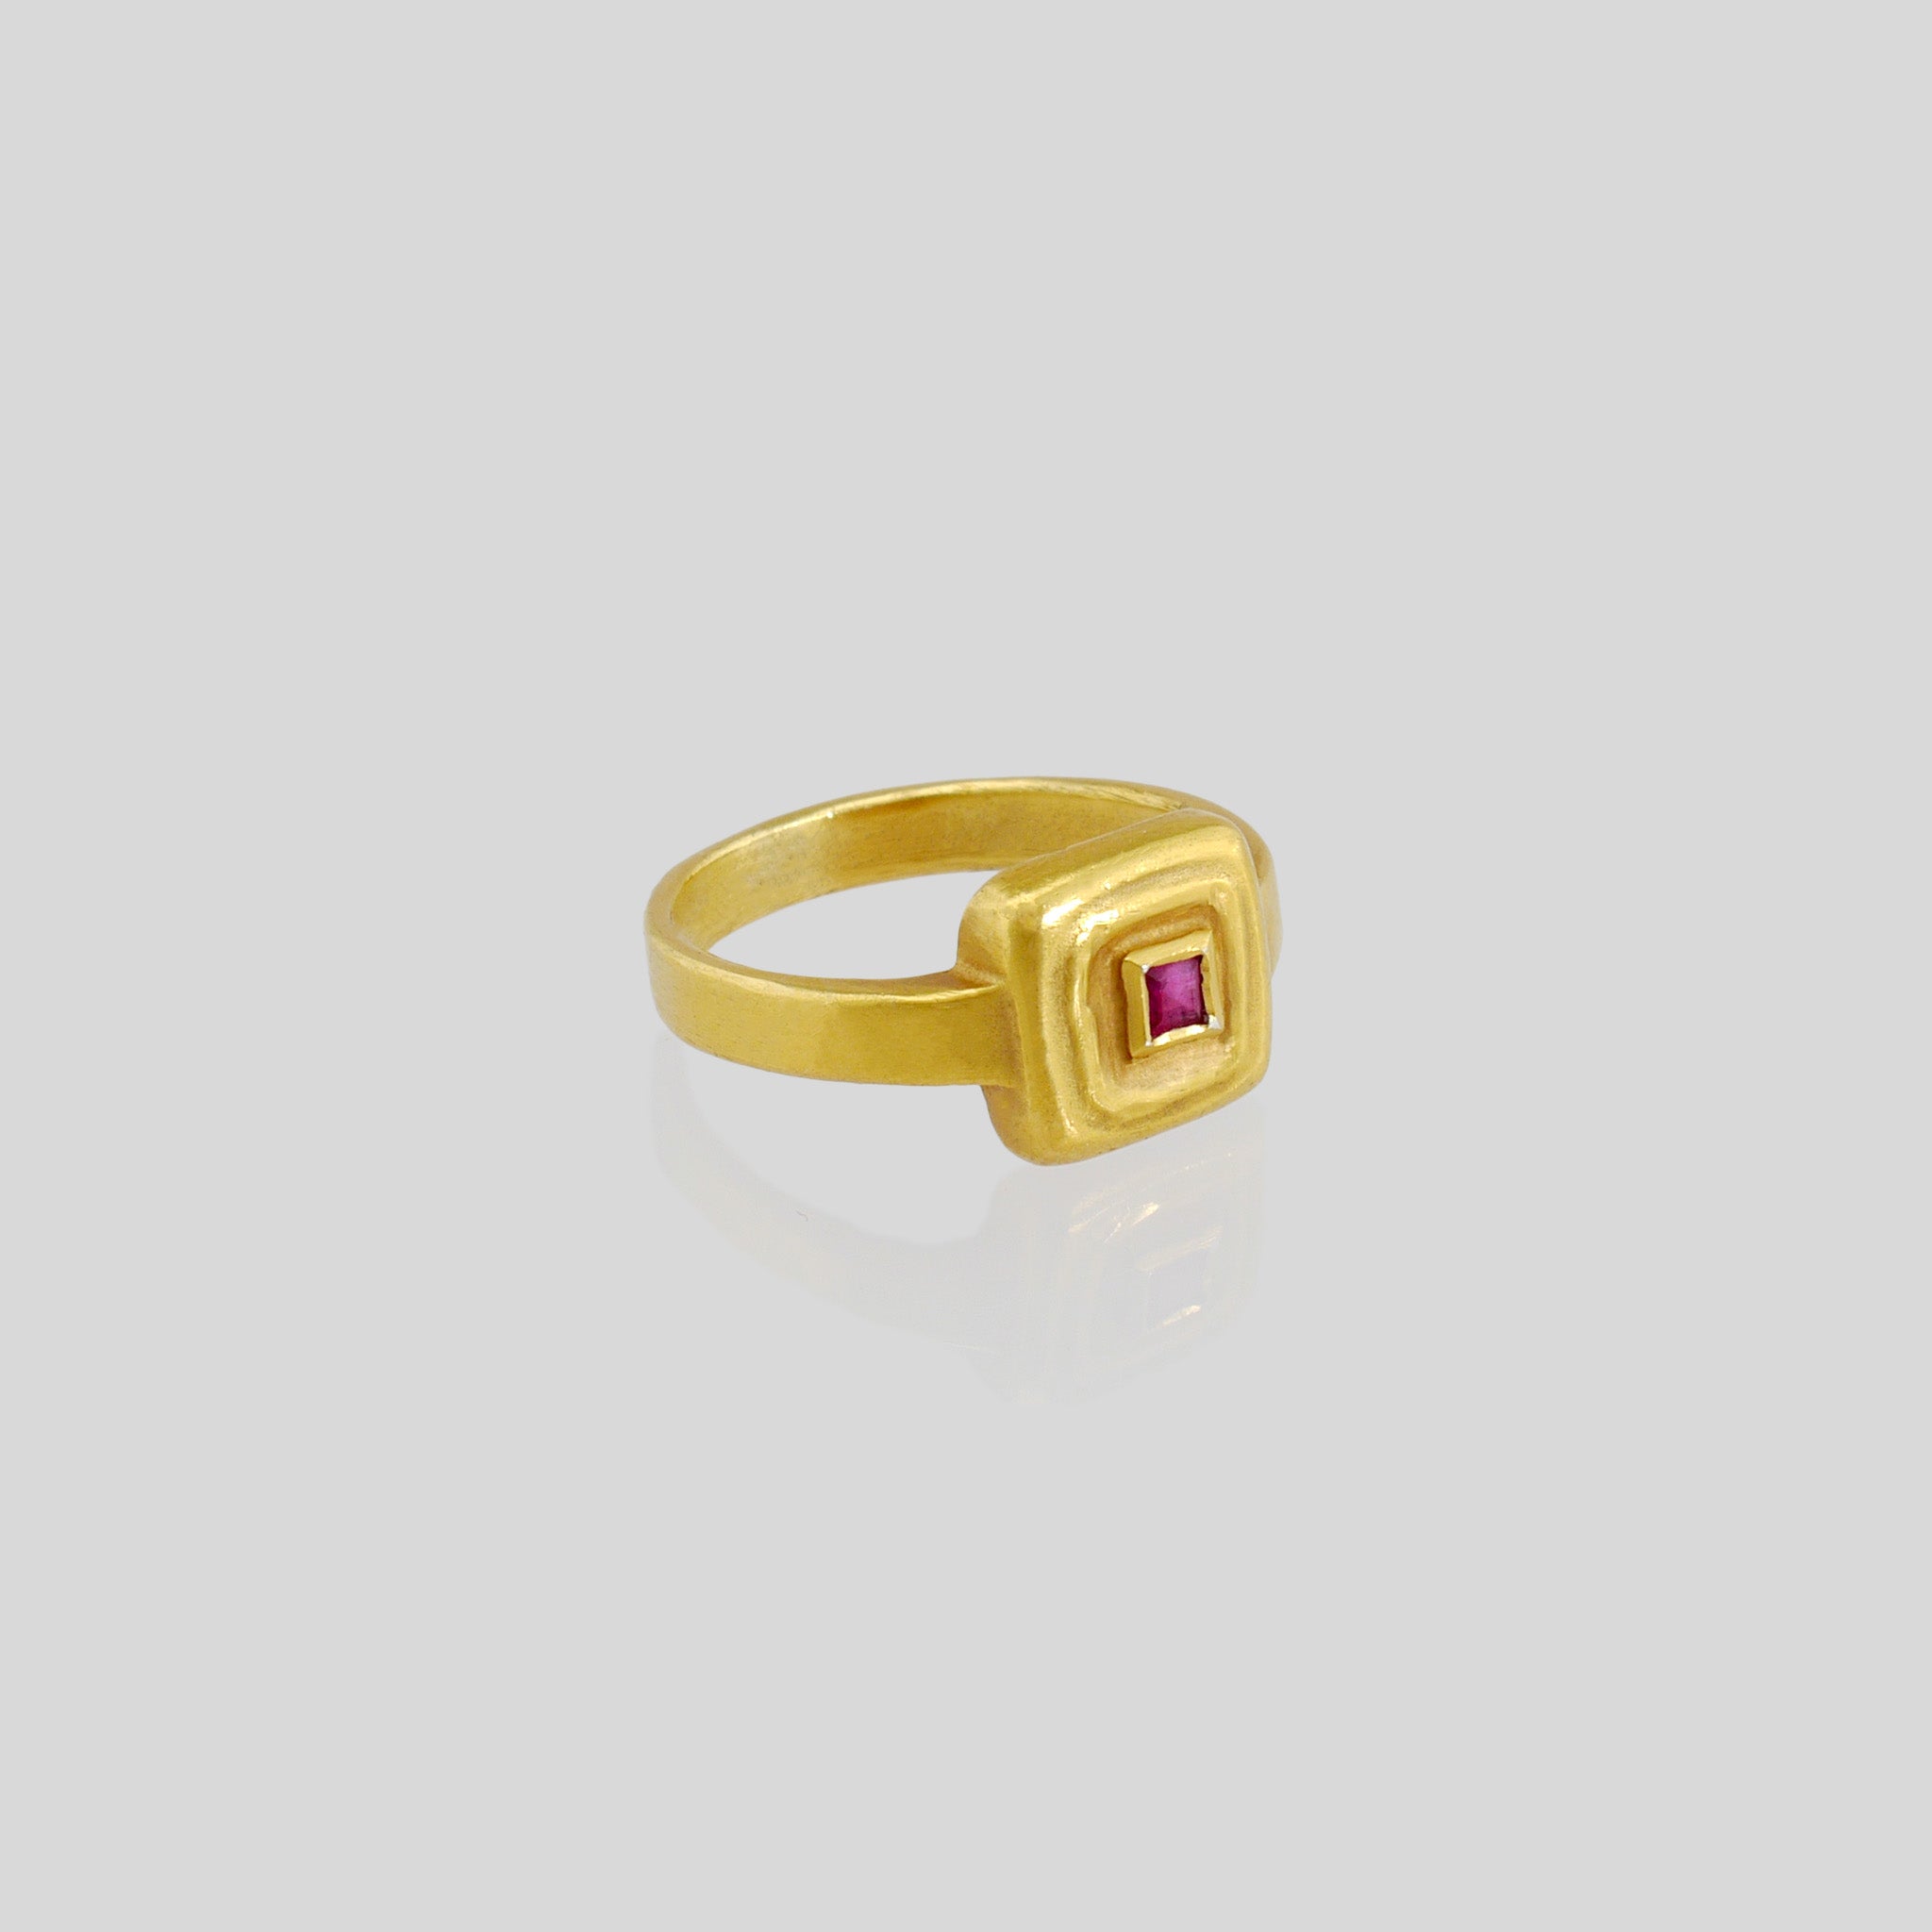 Handcrafted 18k Gold ring featuring a square Ruby set atop a square surface, evoking the ancient Egyptian era's golden jewelry of the Pharaohs.